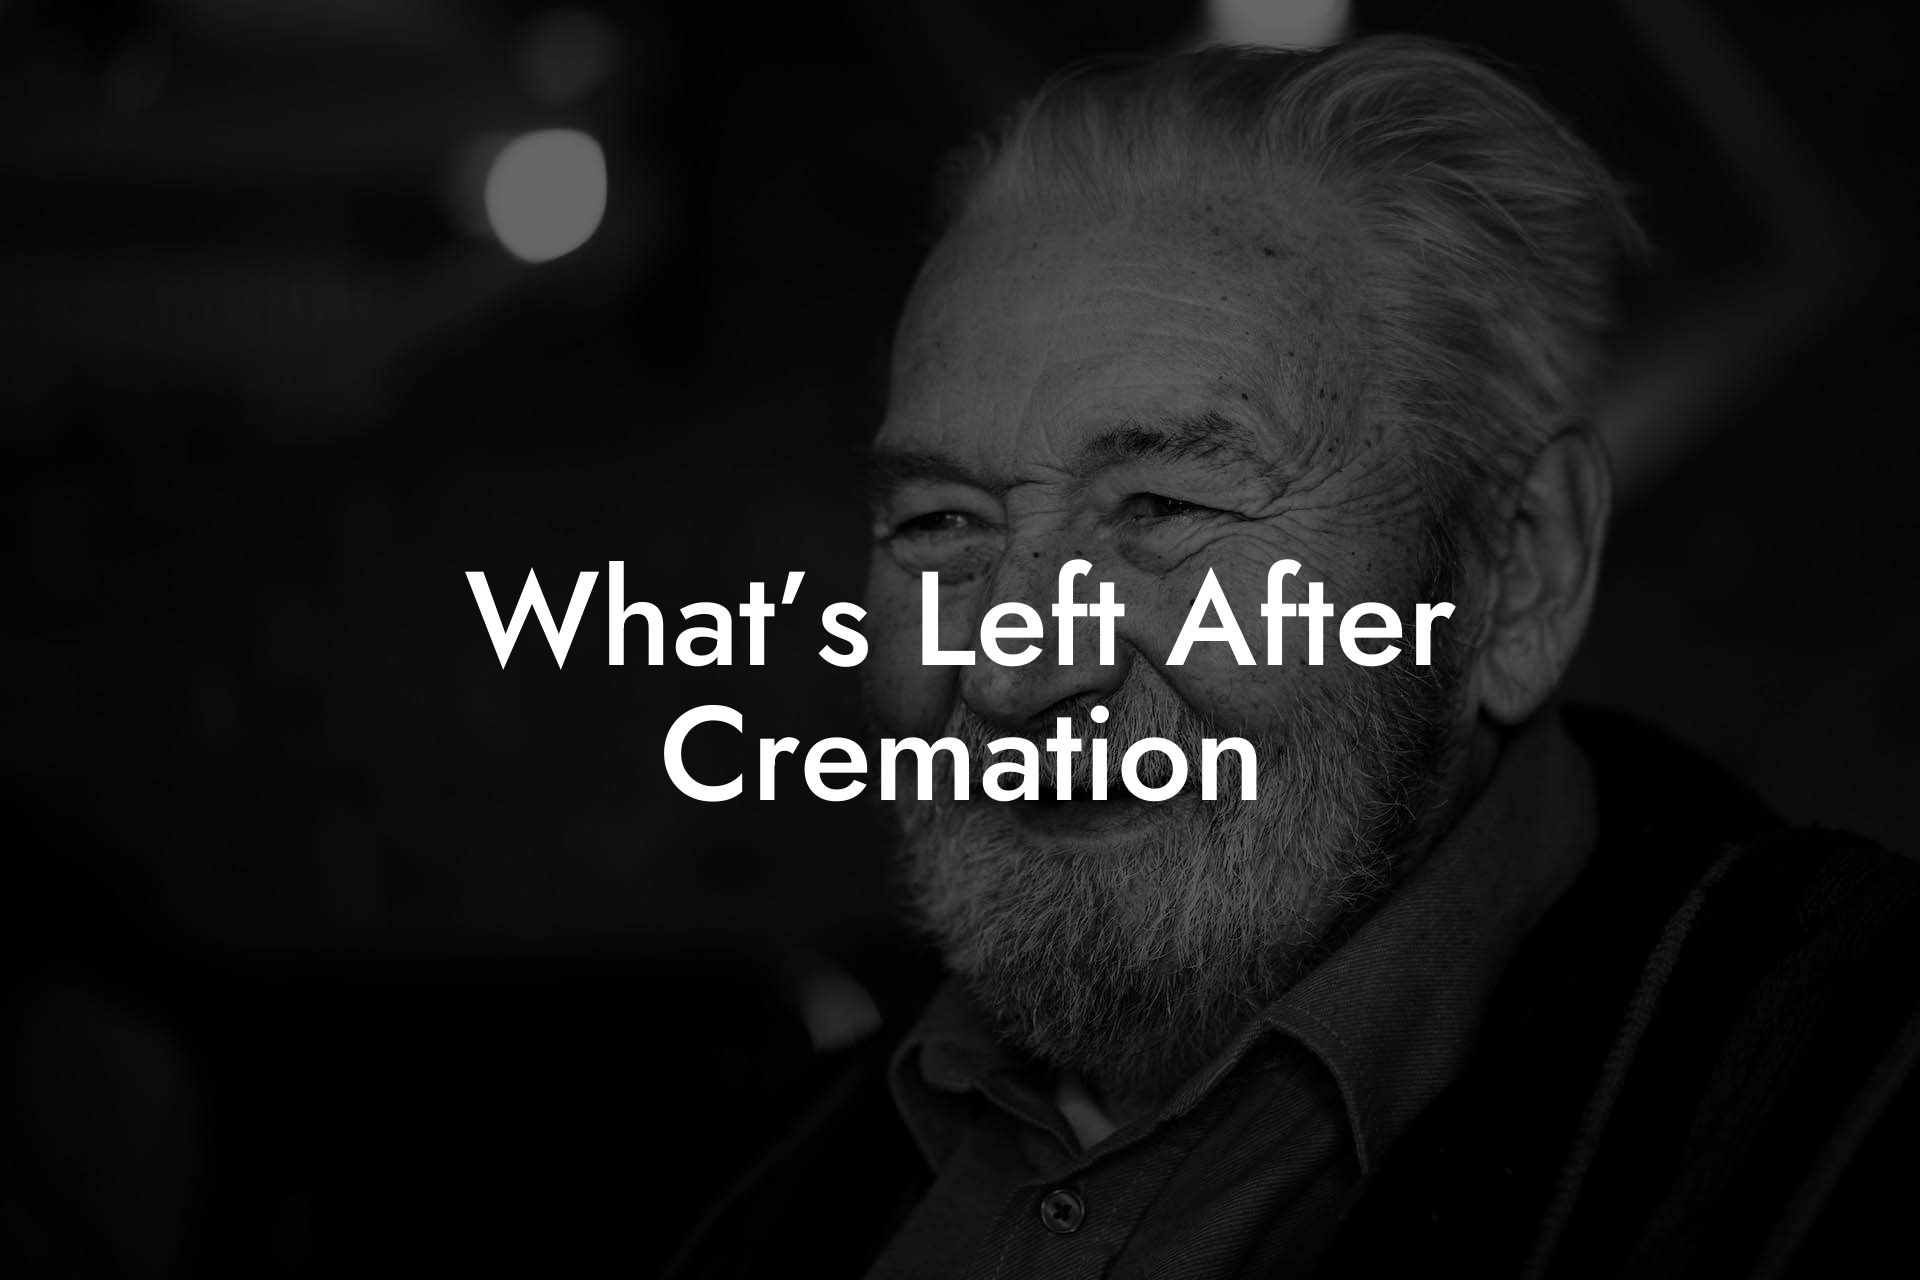 What’s Left After Cremation